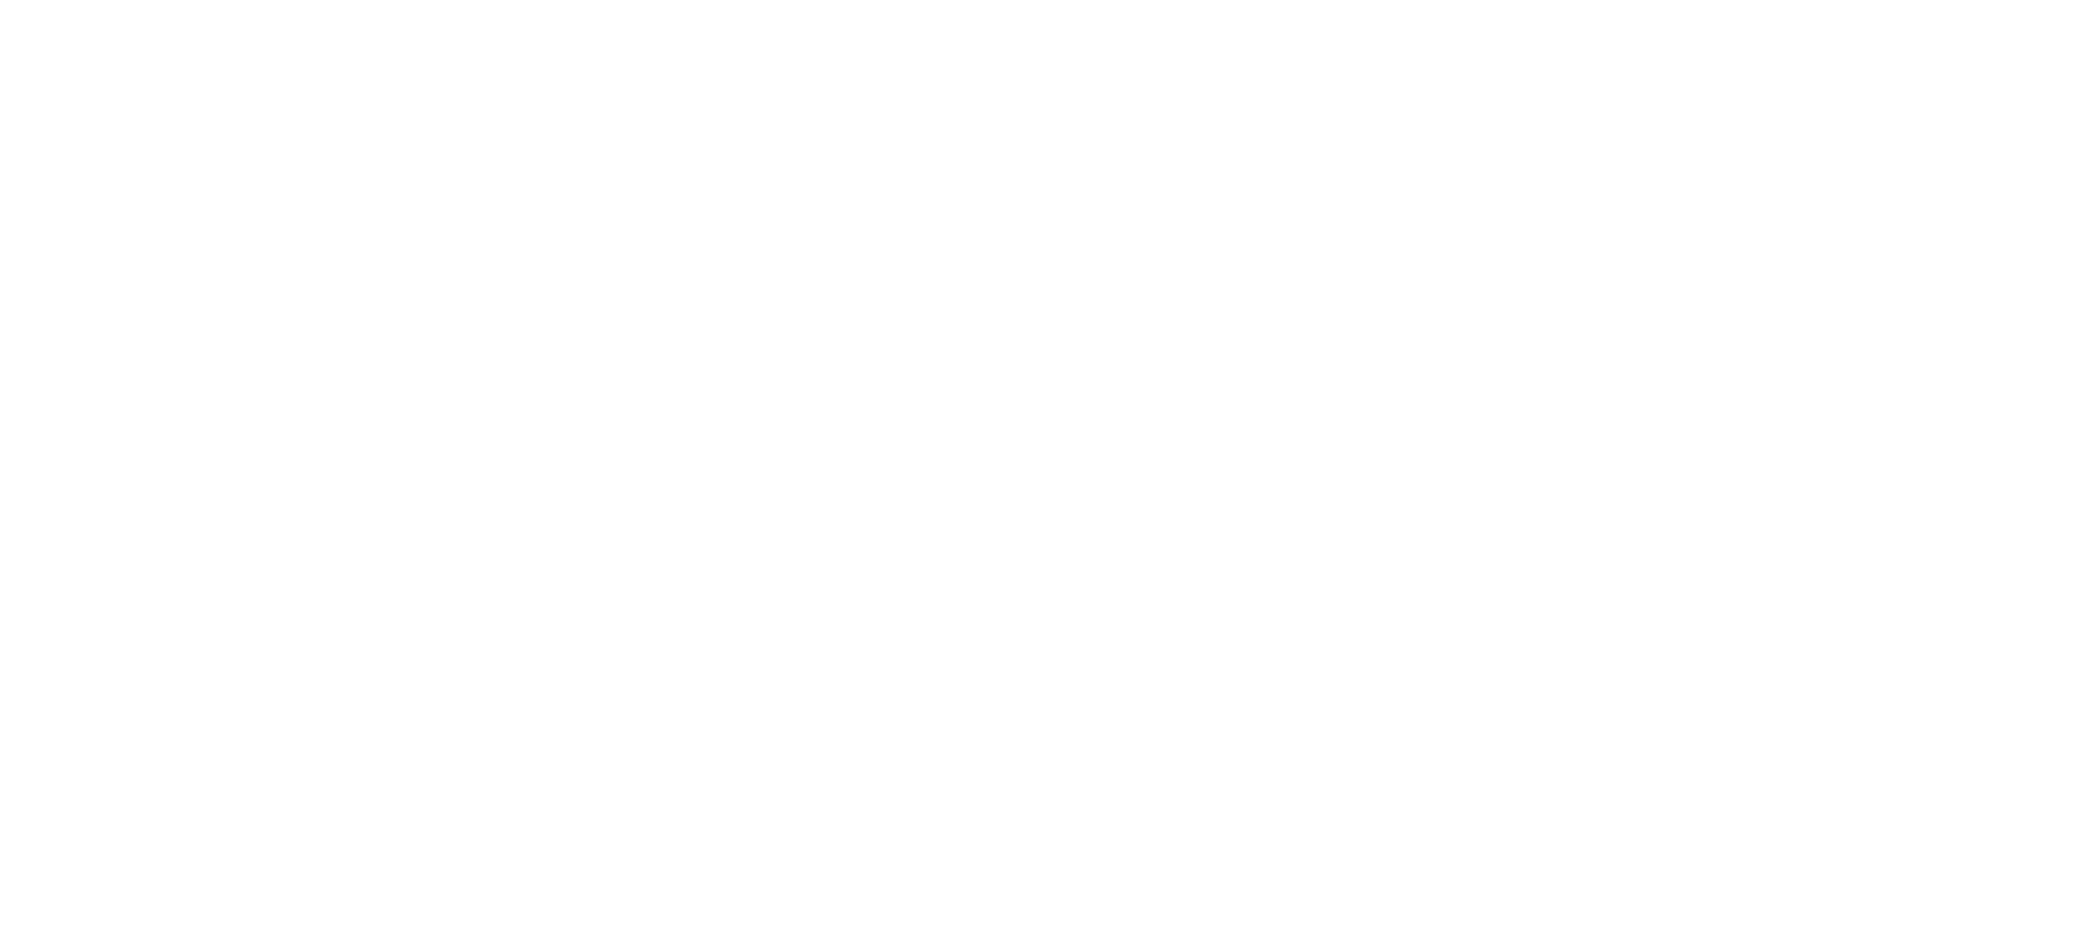 2021 State Standard of Excellence | Results for America